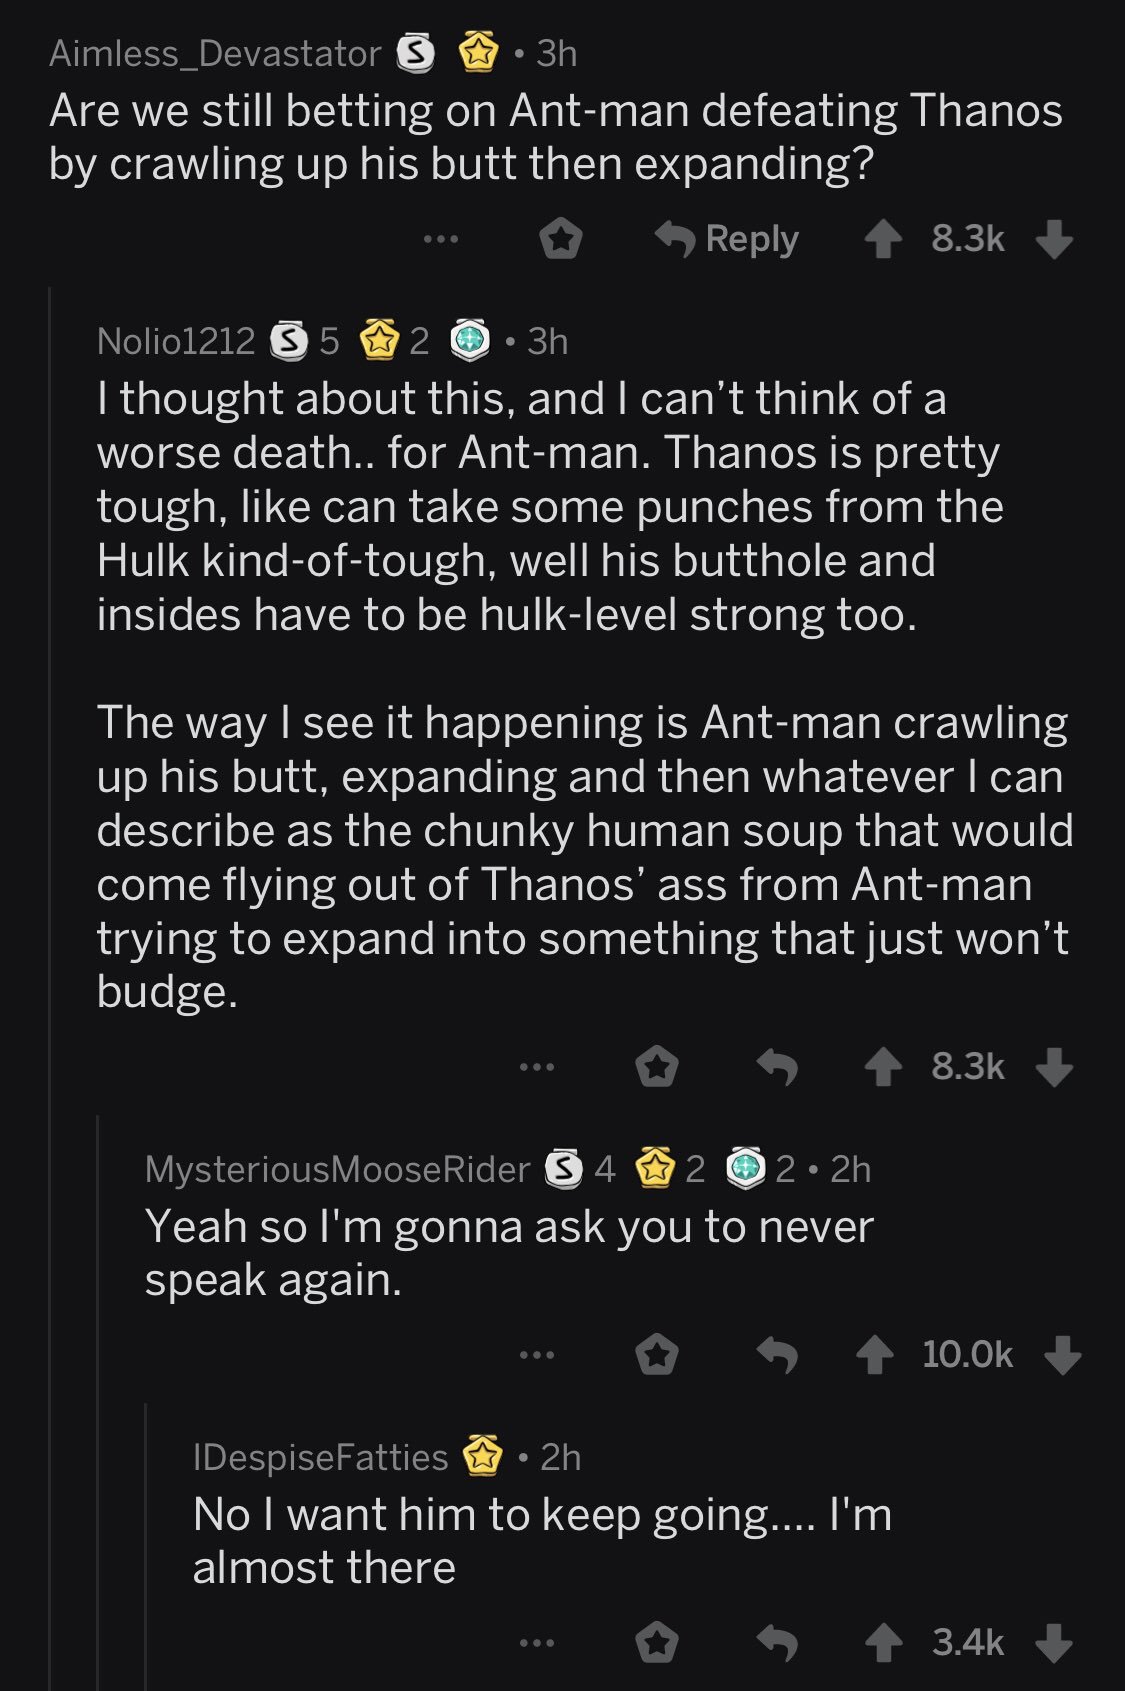 Avengers Endgame theory about Ant Man and Thanos